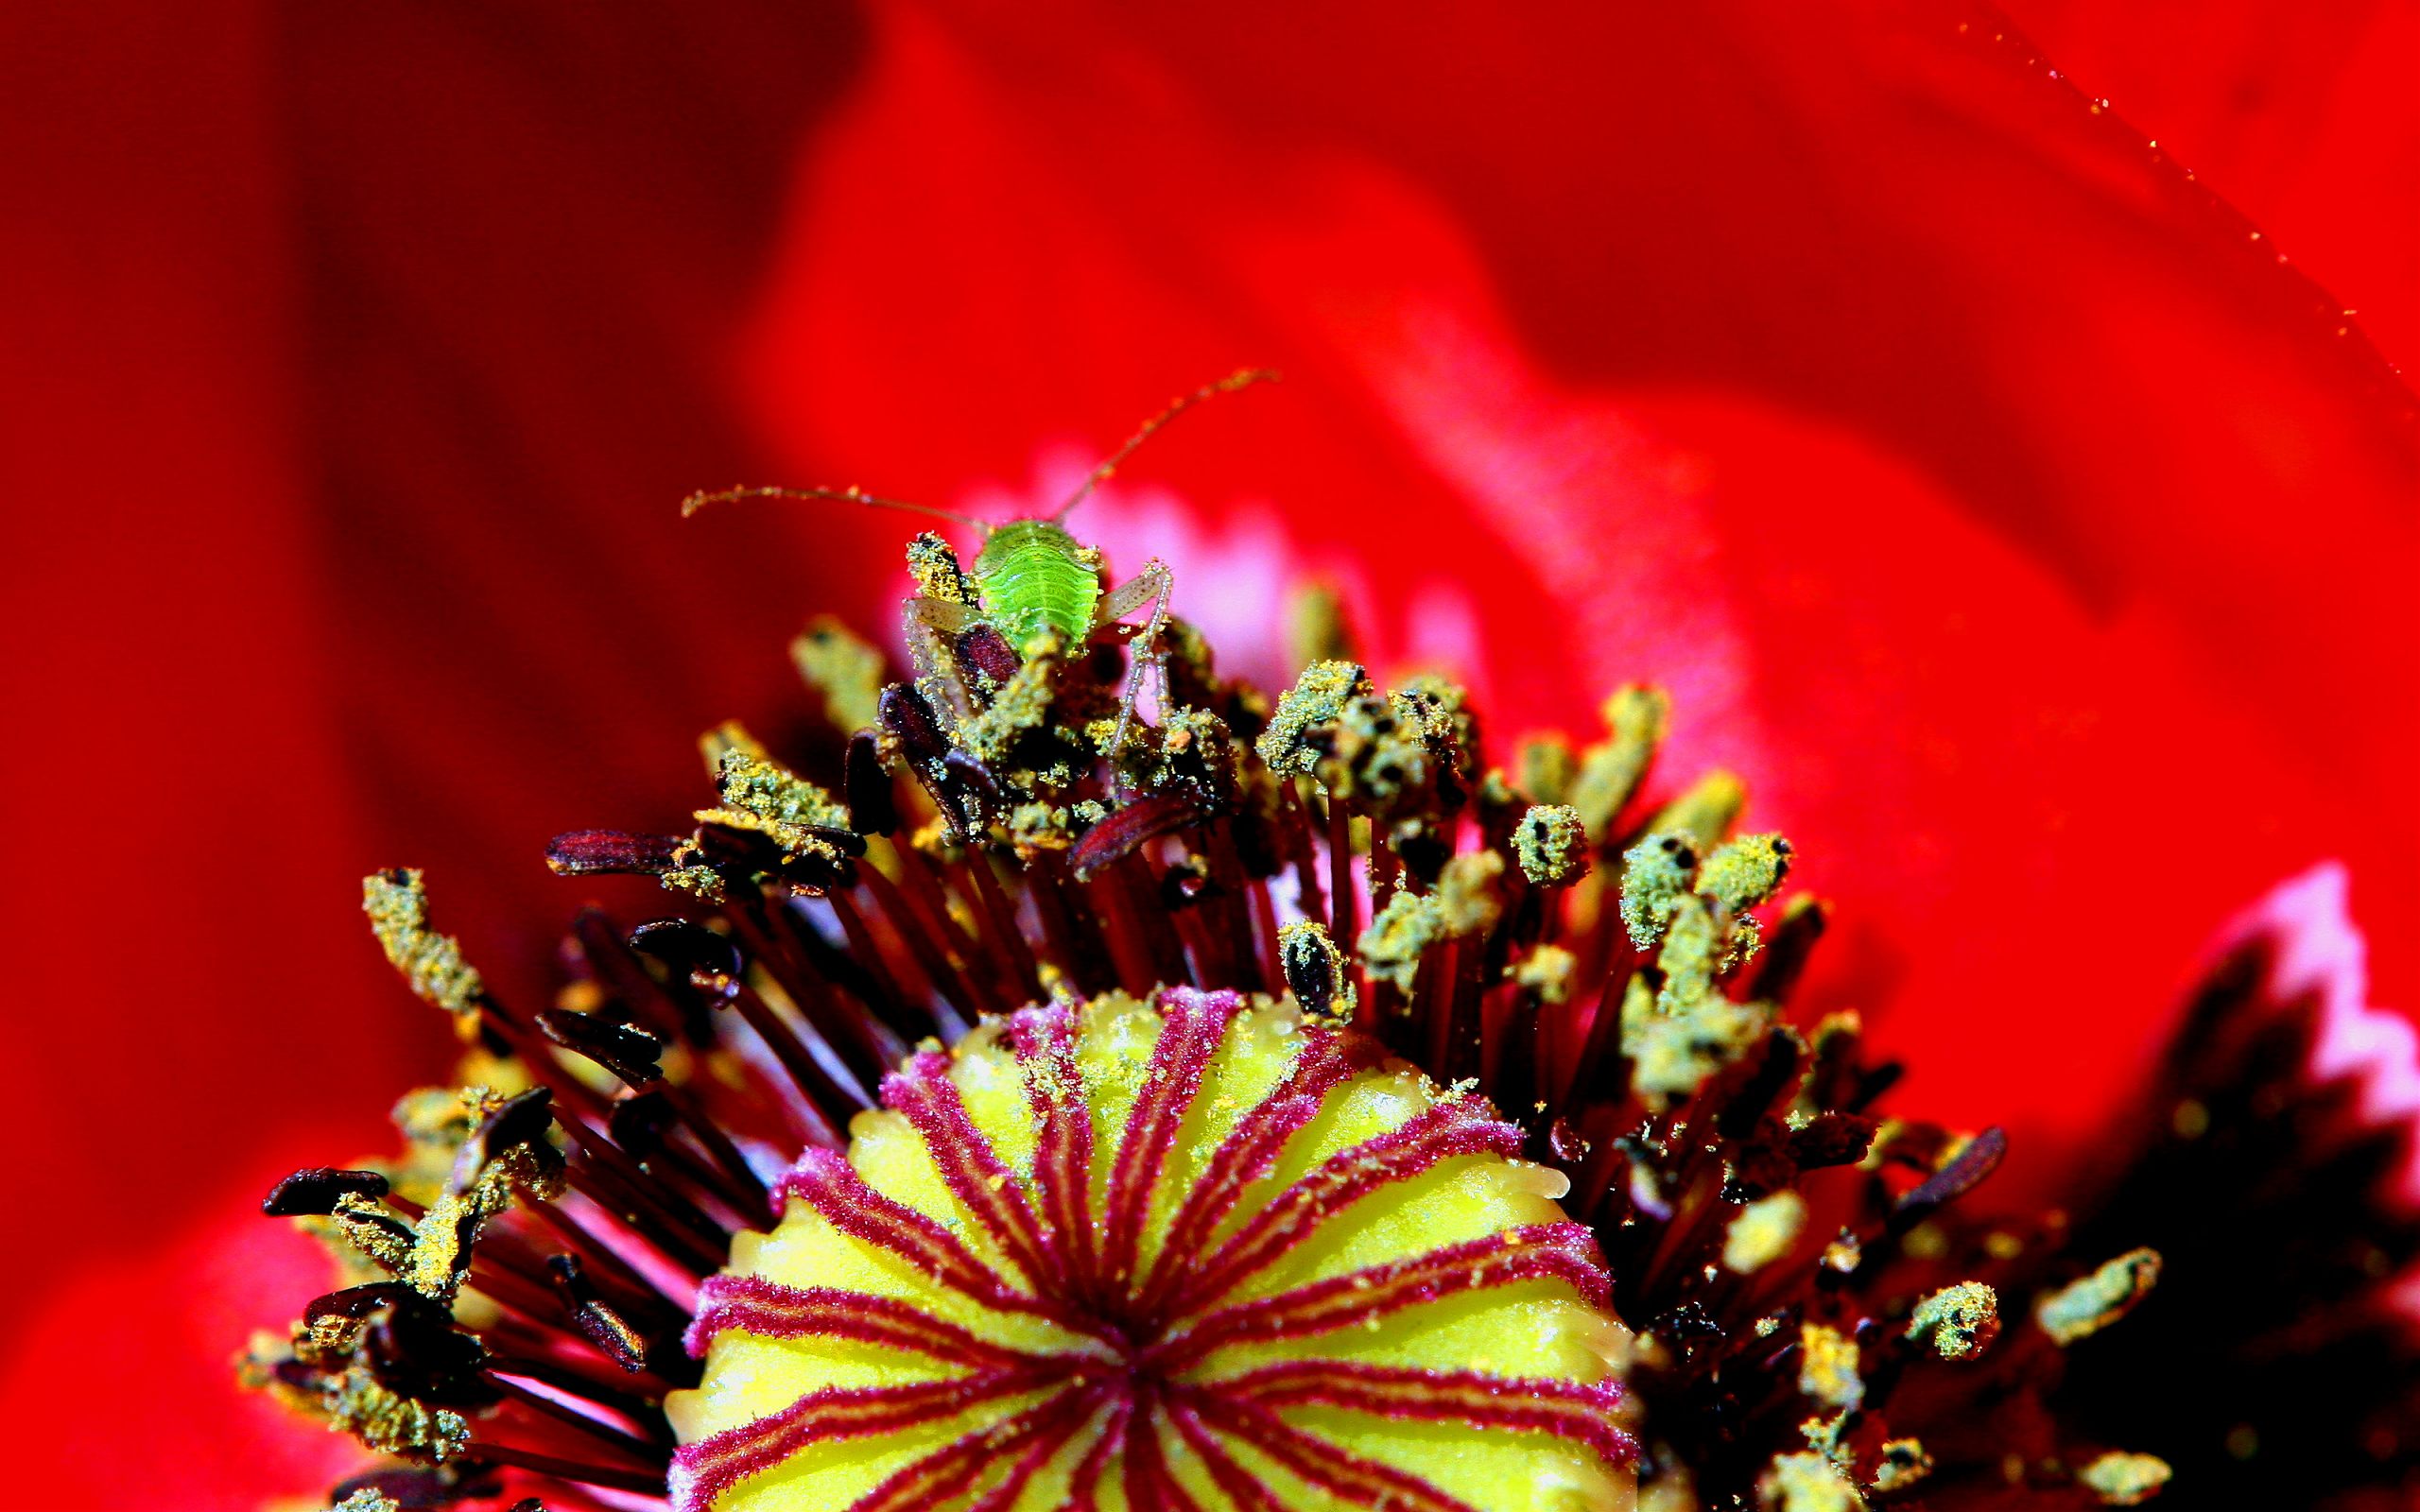 Blattlaus insect amidst vibrant poppy blossoms